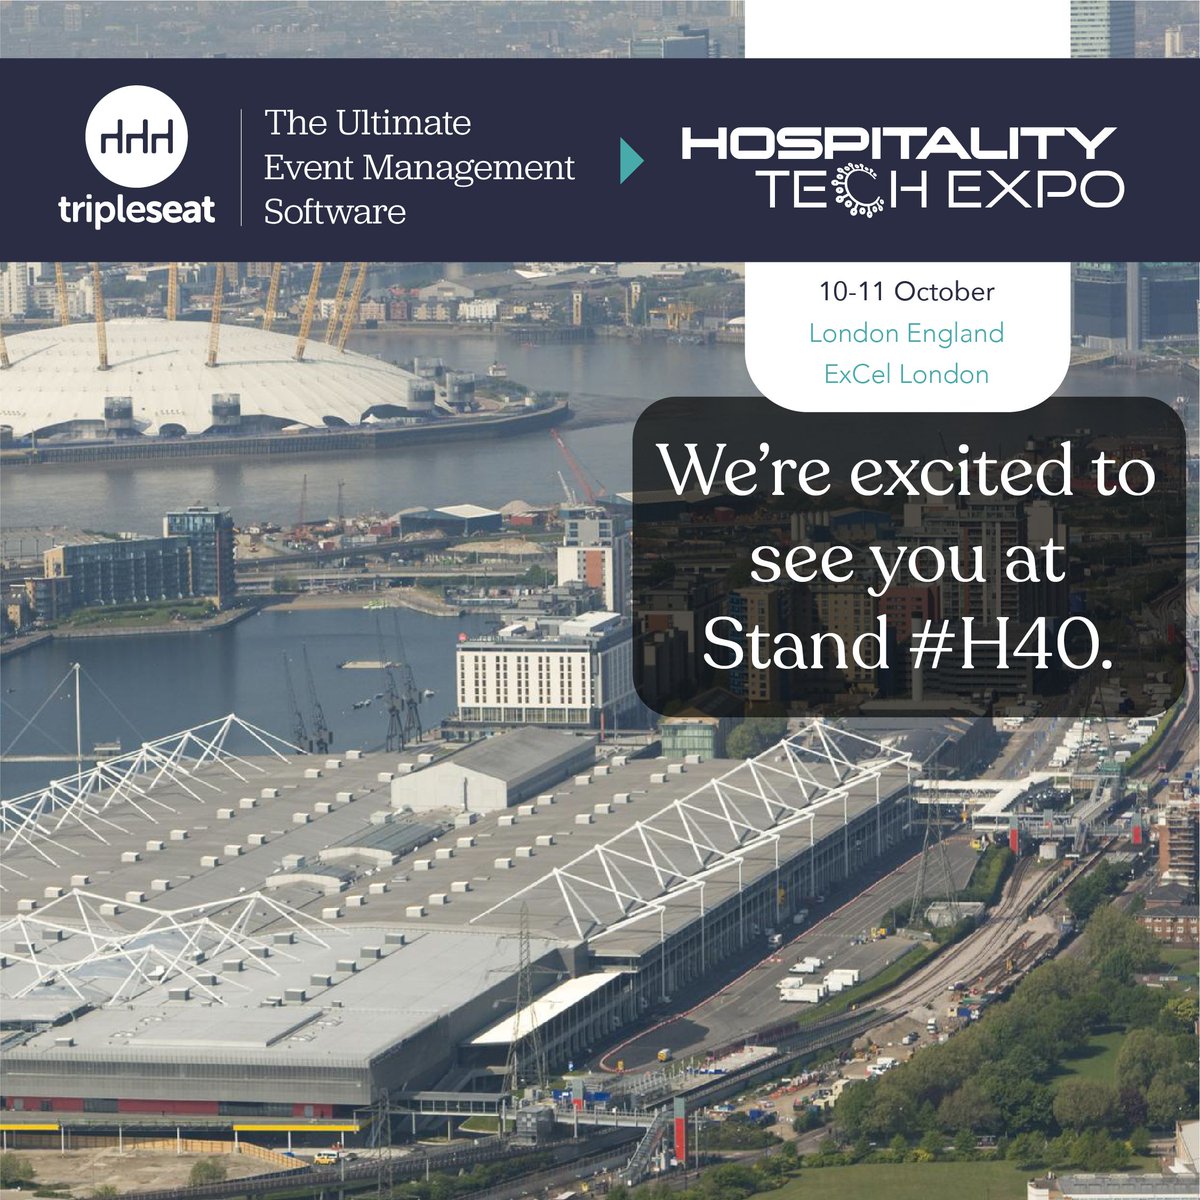 Are you in the UK and heading to #HospitalityTechExpo, #ExCelLondon on 10-11 October? The Tripleseat UK team will be there at booth #H40 and is excited to talk about how Tripleseat can streamline the event management process at your hospitality business. bit.ly/45hABq3